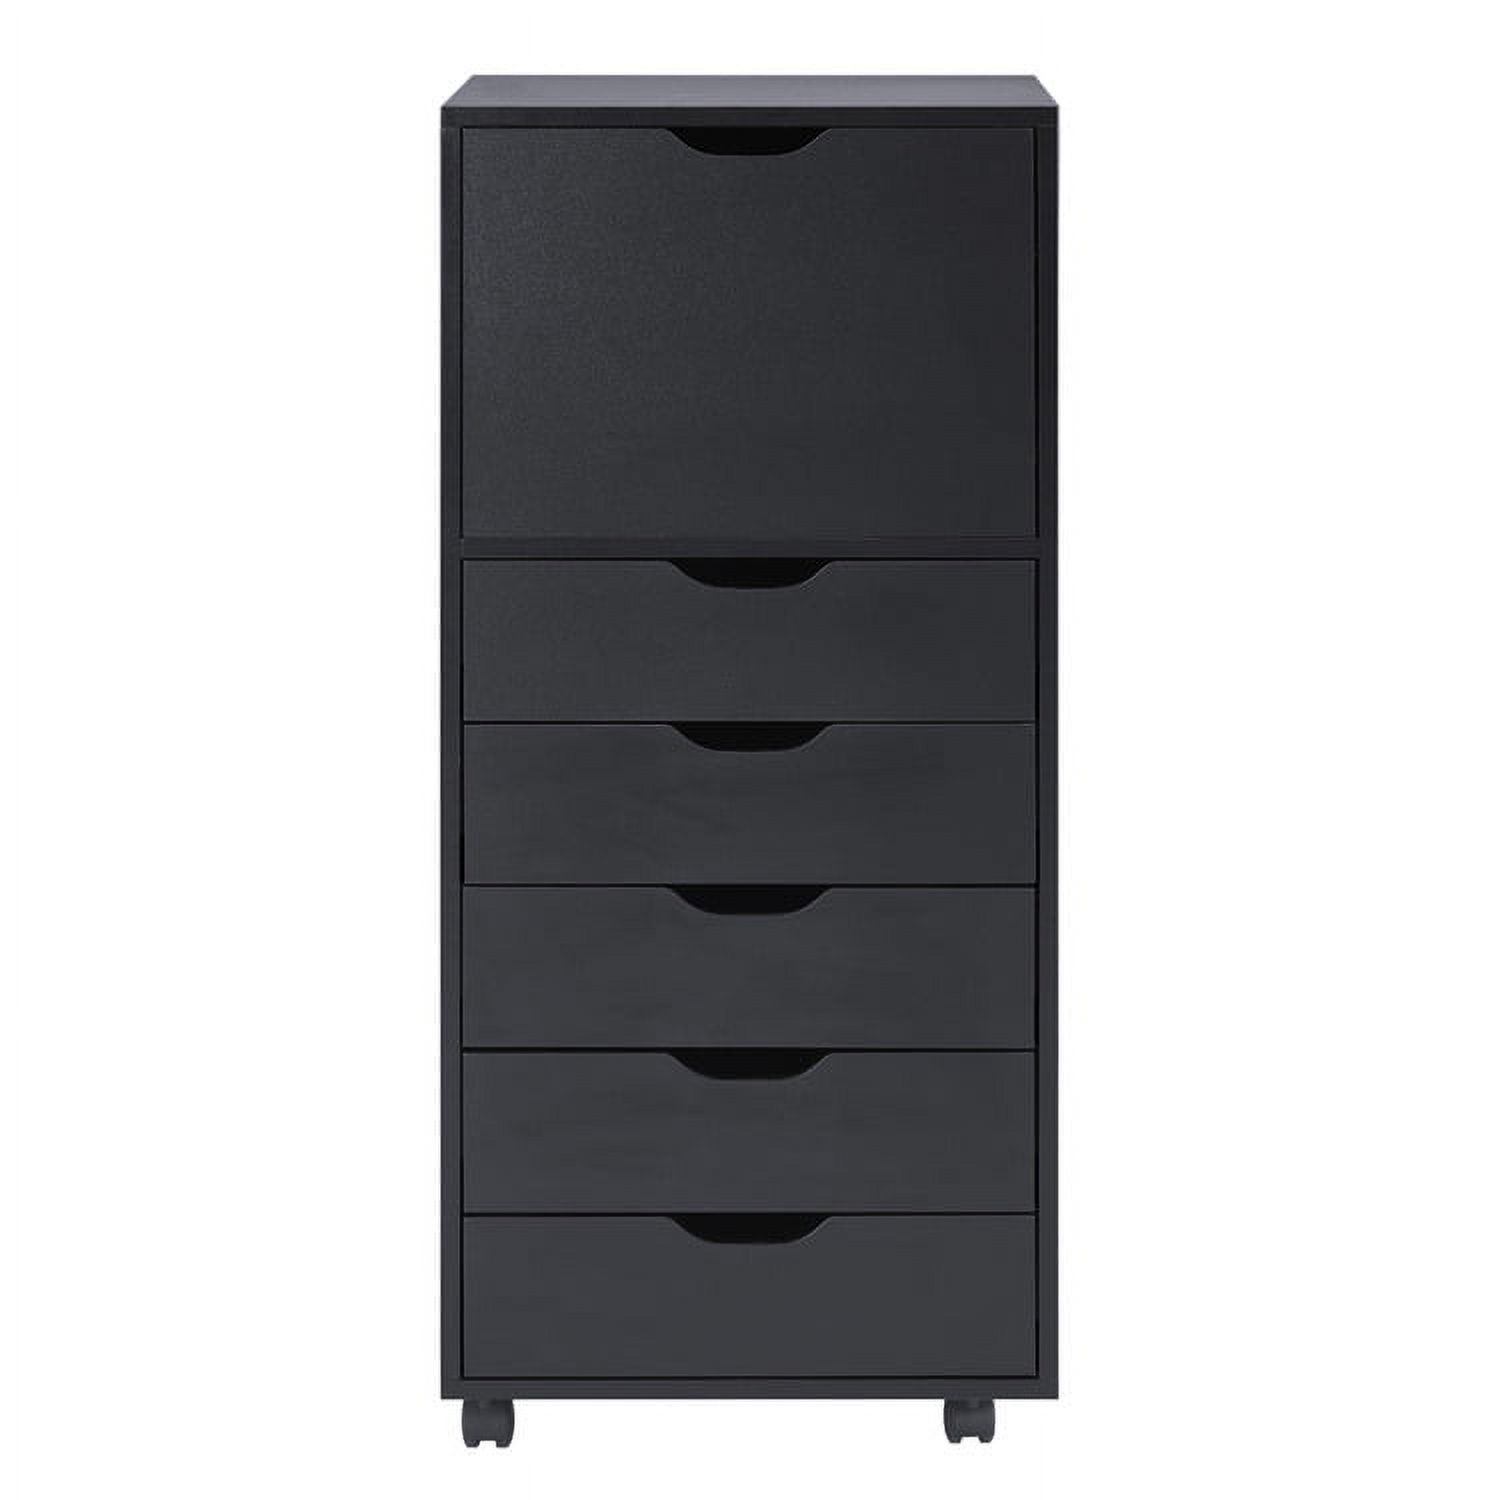 Office File Cabinets Wooden File Cabinets for Home Office Lateral File Cabinet Wood File Cabinet Mobile File Cabinet Mobile Storage Cabinet Filing Storage Drawer Cabinet by Naomi Home Black / 6 Drawer - image 2 of 5